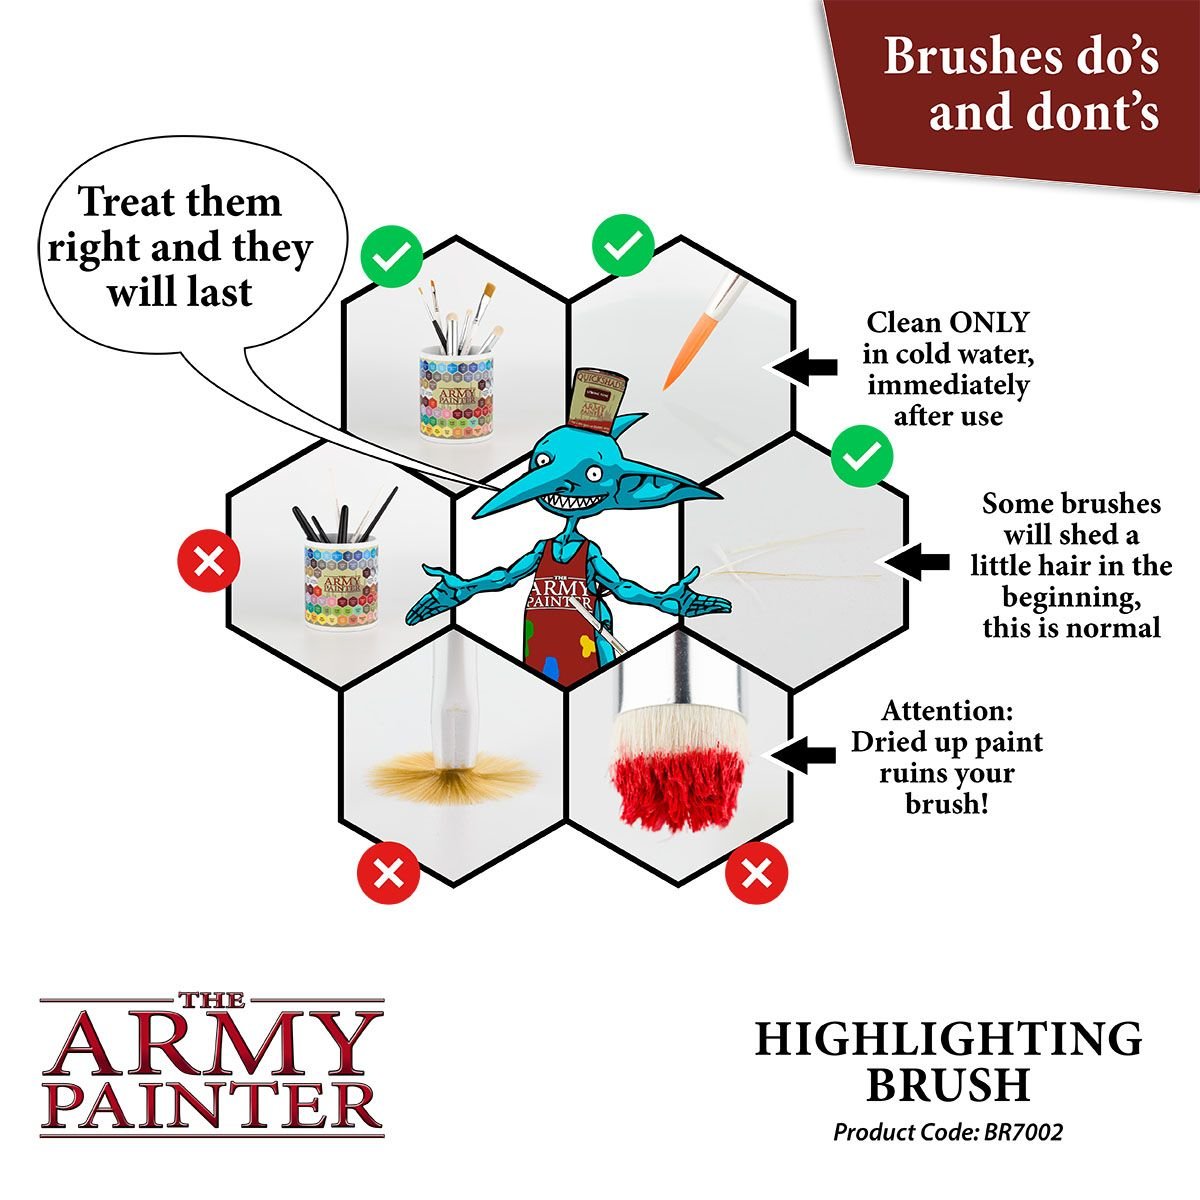  The Army Painter Hobby: Highlighting - Hobby Brush with  Synthetic Taklon Hair - Fine Detail Paint Brush, Small Paint Brush, Model  Paint Brush and Fine Tip Paint Brushes for Miniature Painting 